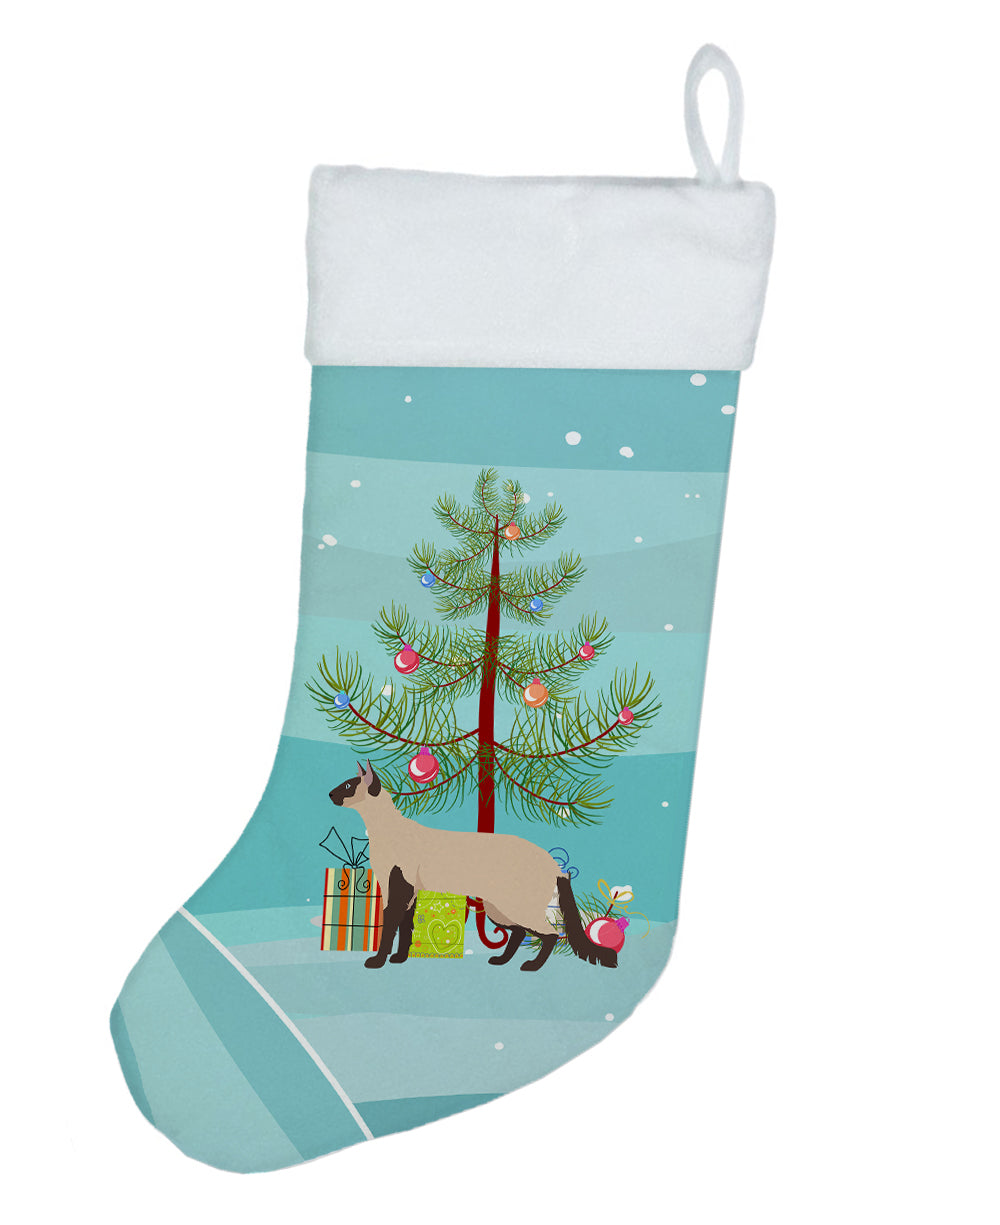 Colorpoint Longhair #3 Cat Merry Christmas Christmas Stocking